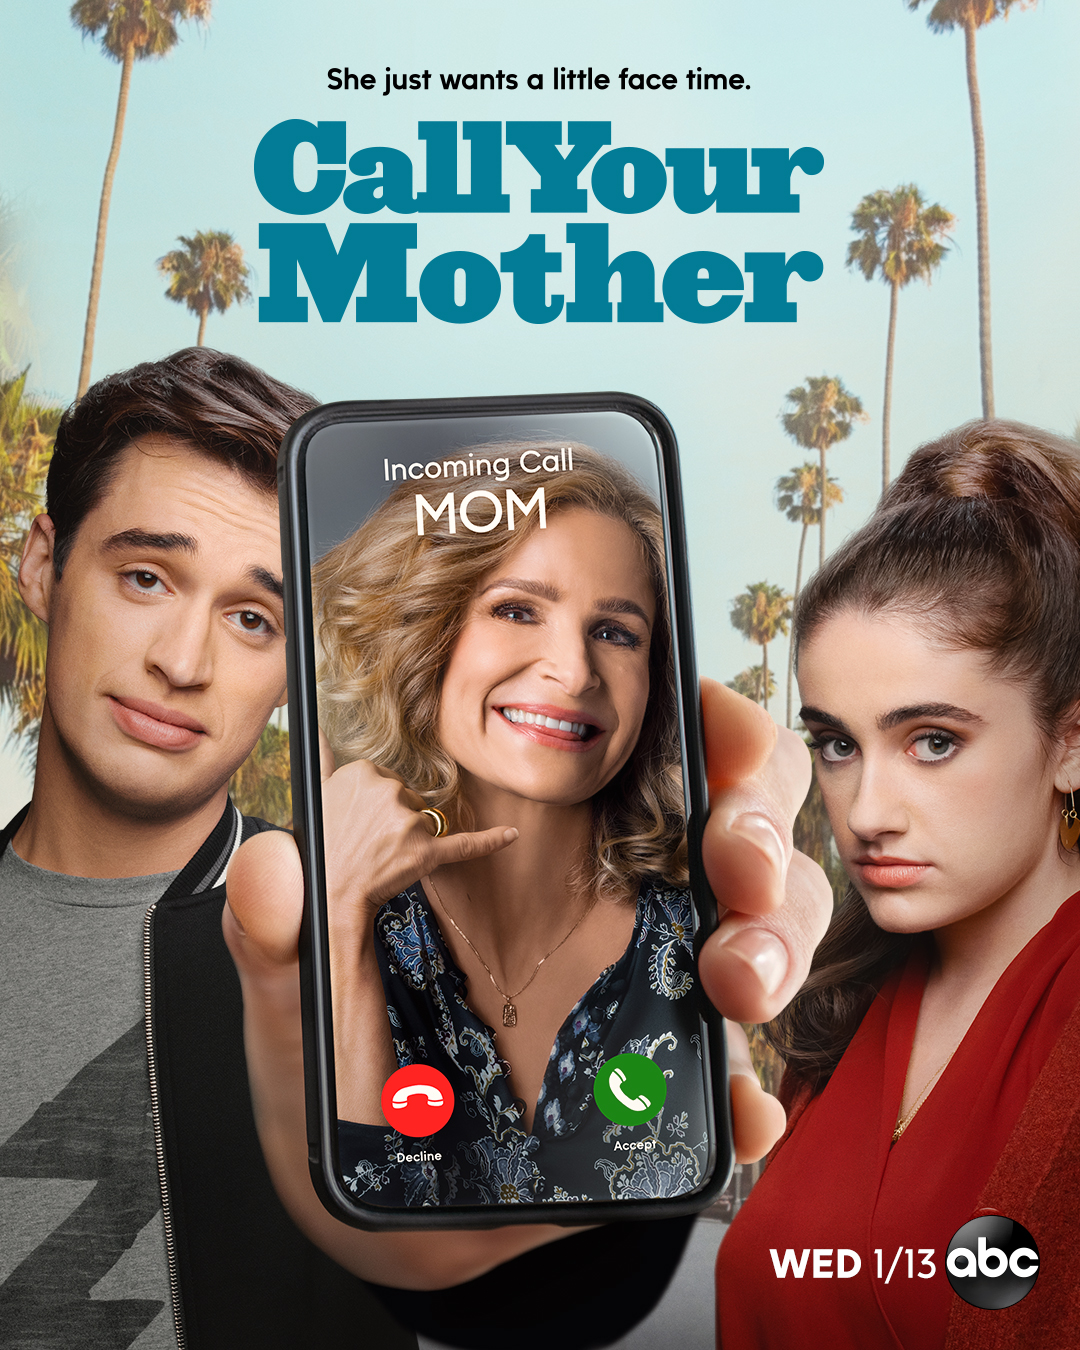 Empty Nest to Hot Mess : ABC's New Sitcom "Call Your Mother" Hilariously showcases Parenthood in a Pandemic